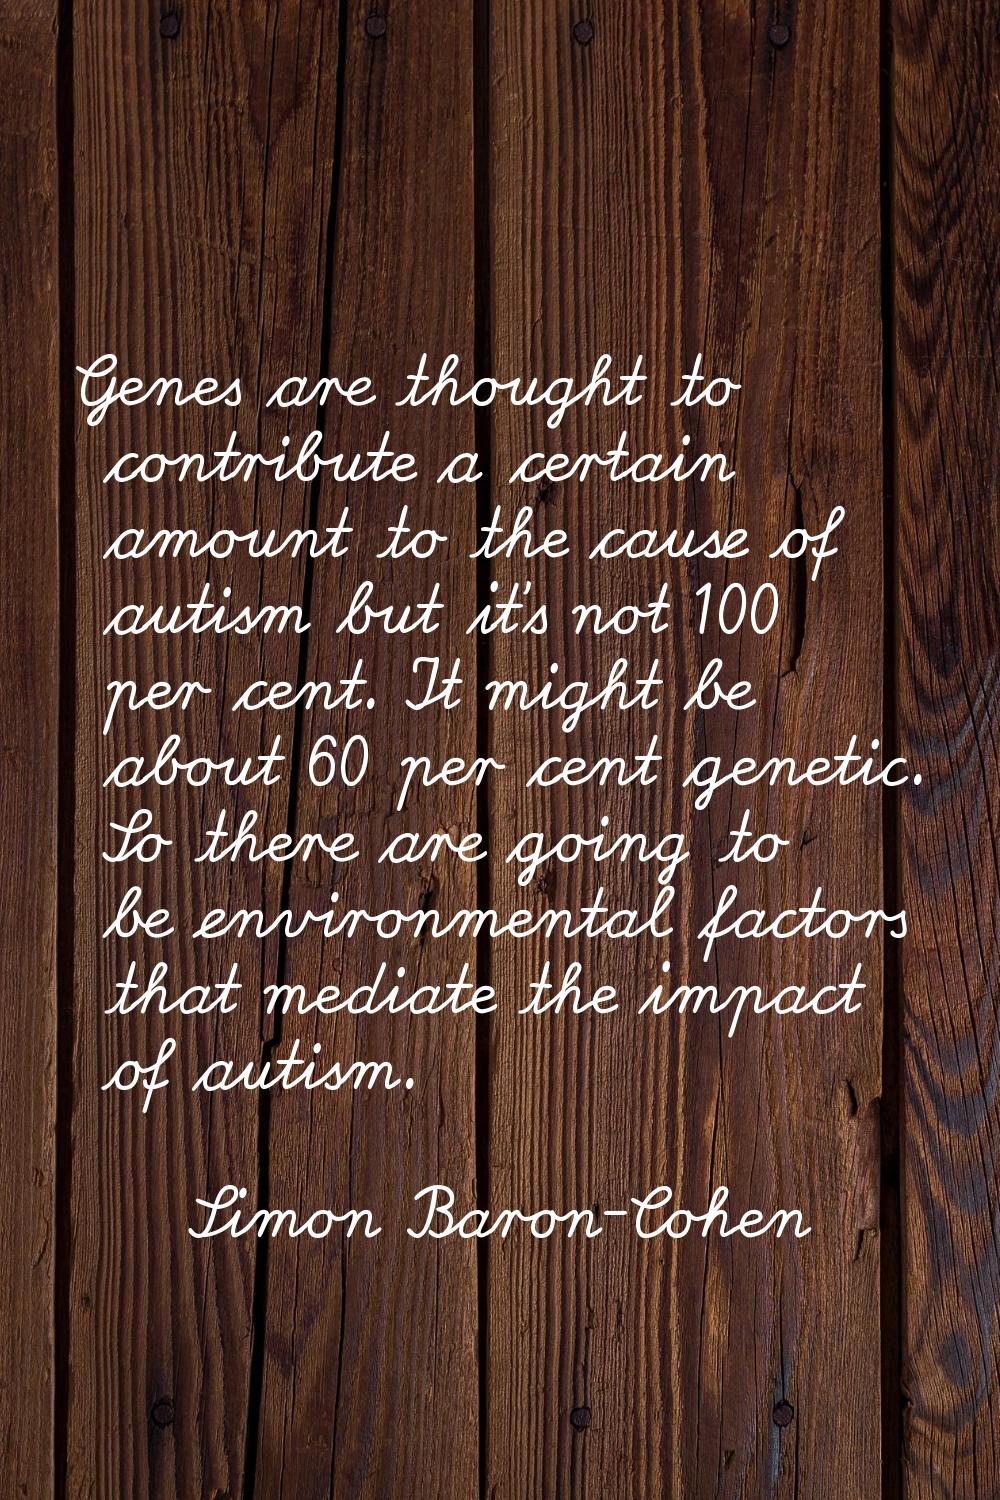 Genes are thought to contribute a certain amount to the cause of autism but it's not 100 per cent. 